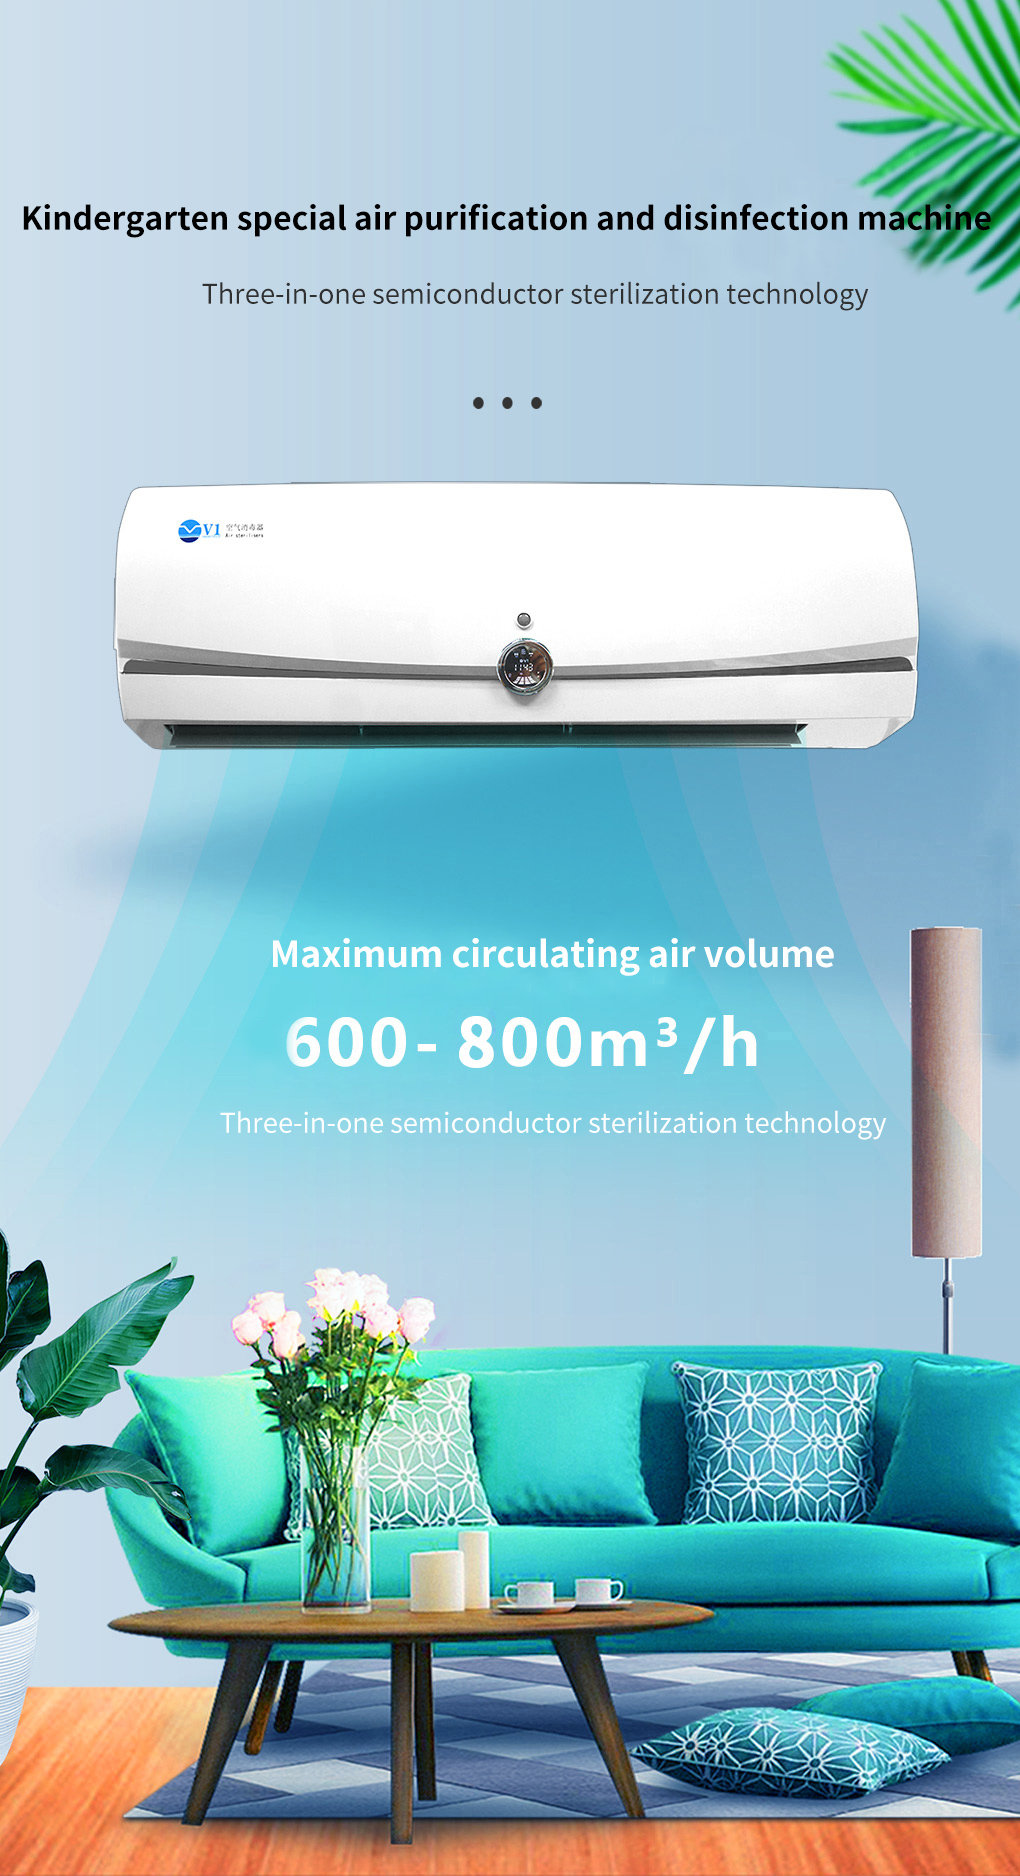 Wall-mounted air sterilizer